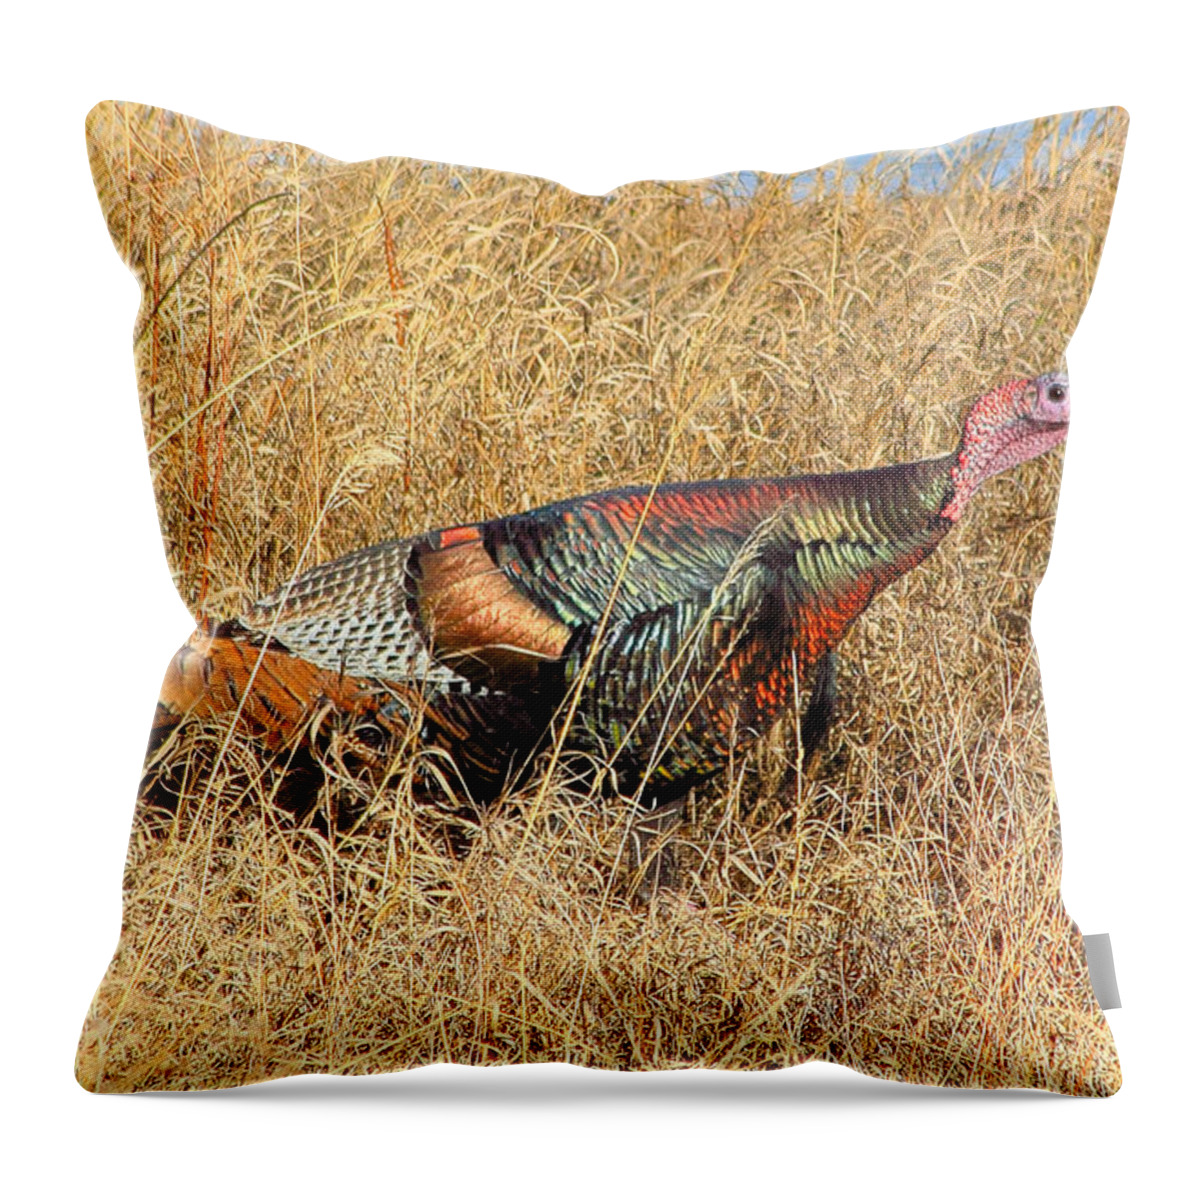 Turkey Throw Pillow featuring the photograph Rainbow Turkey by Shane Bechler